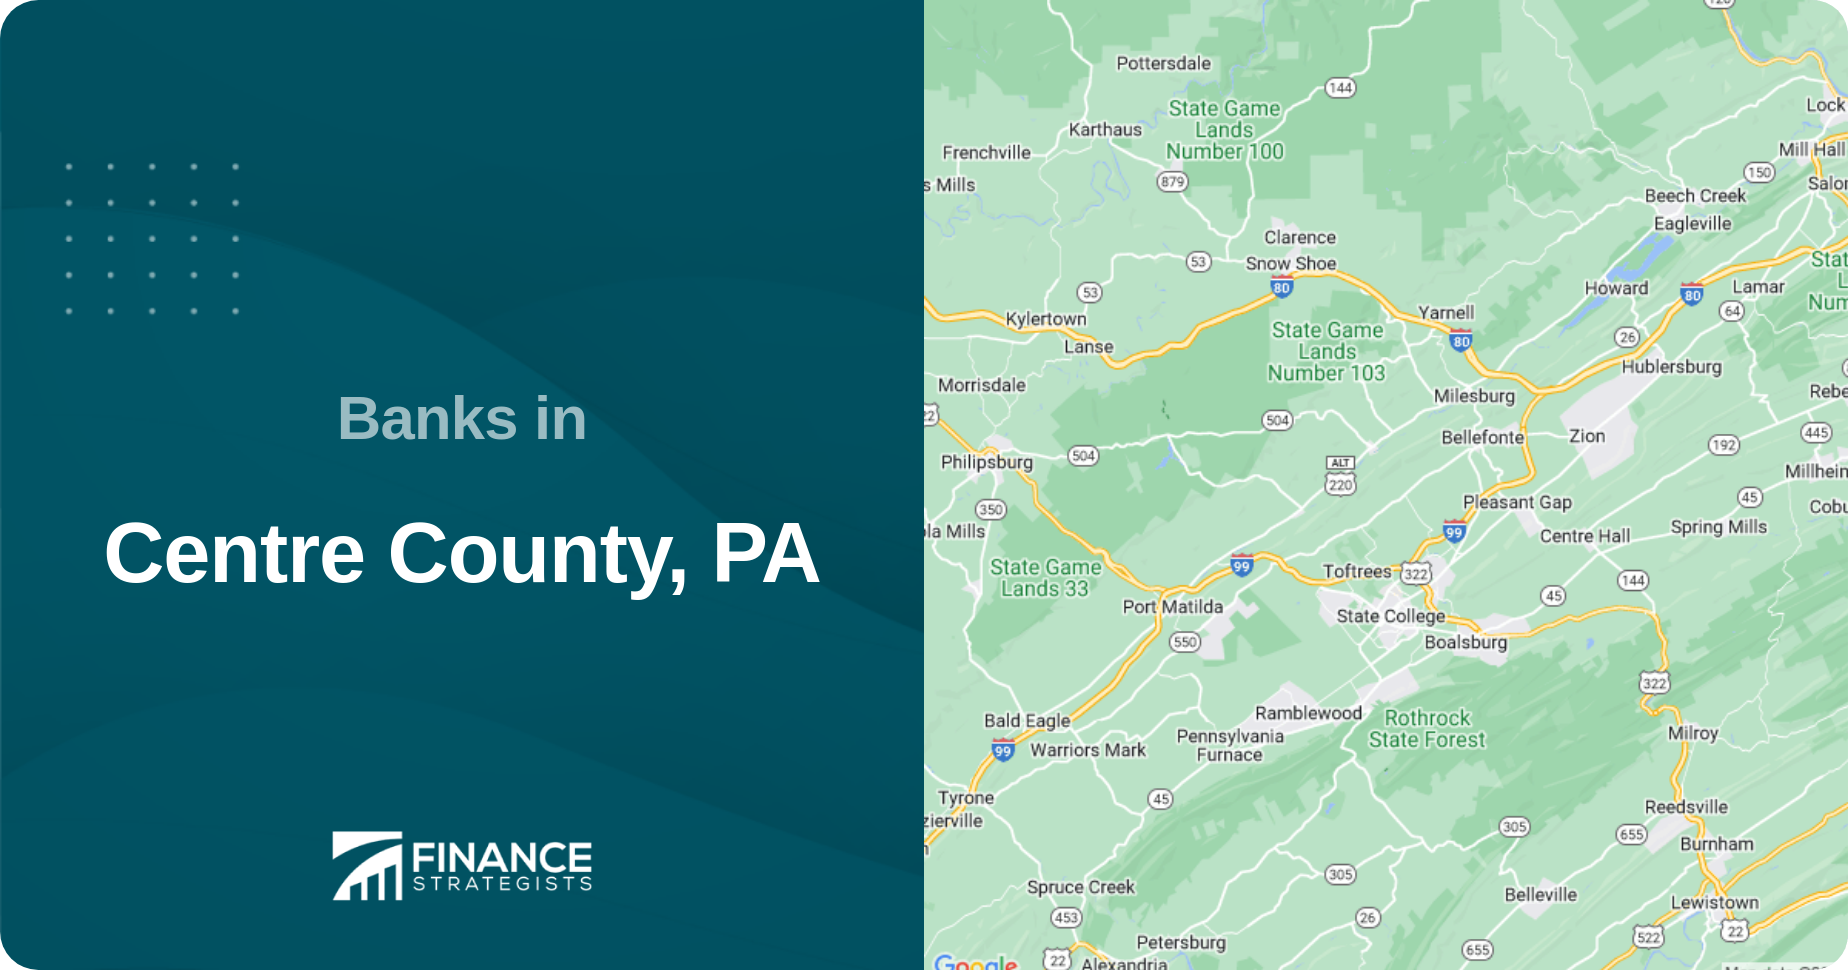 Banks in Centre County, PA